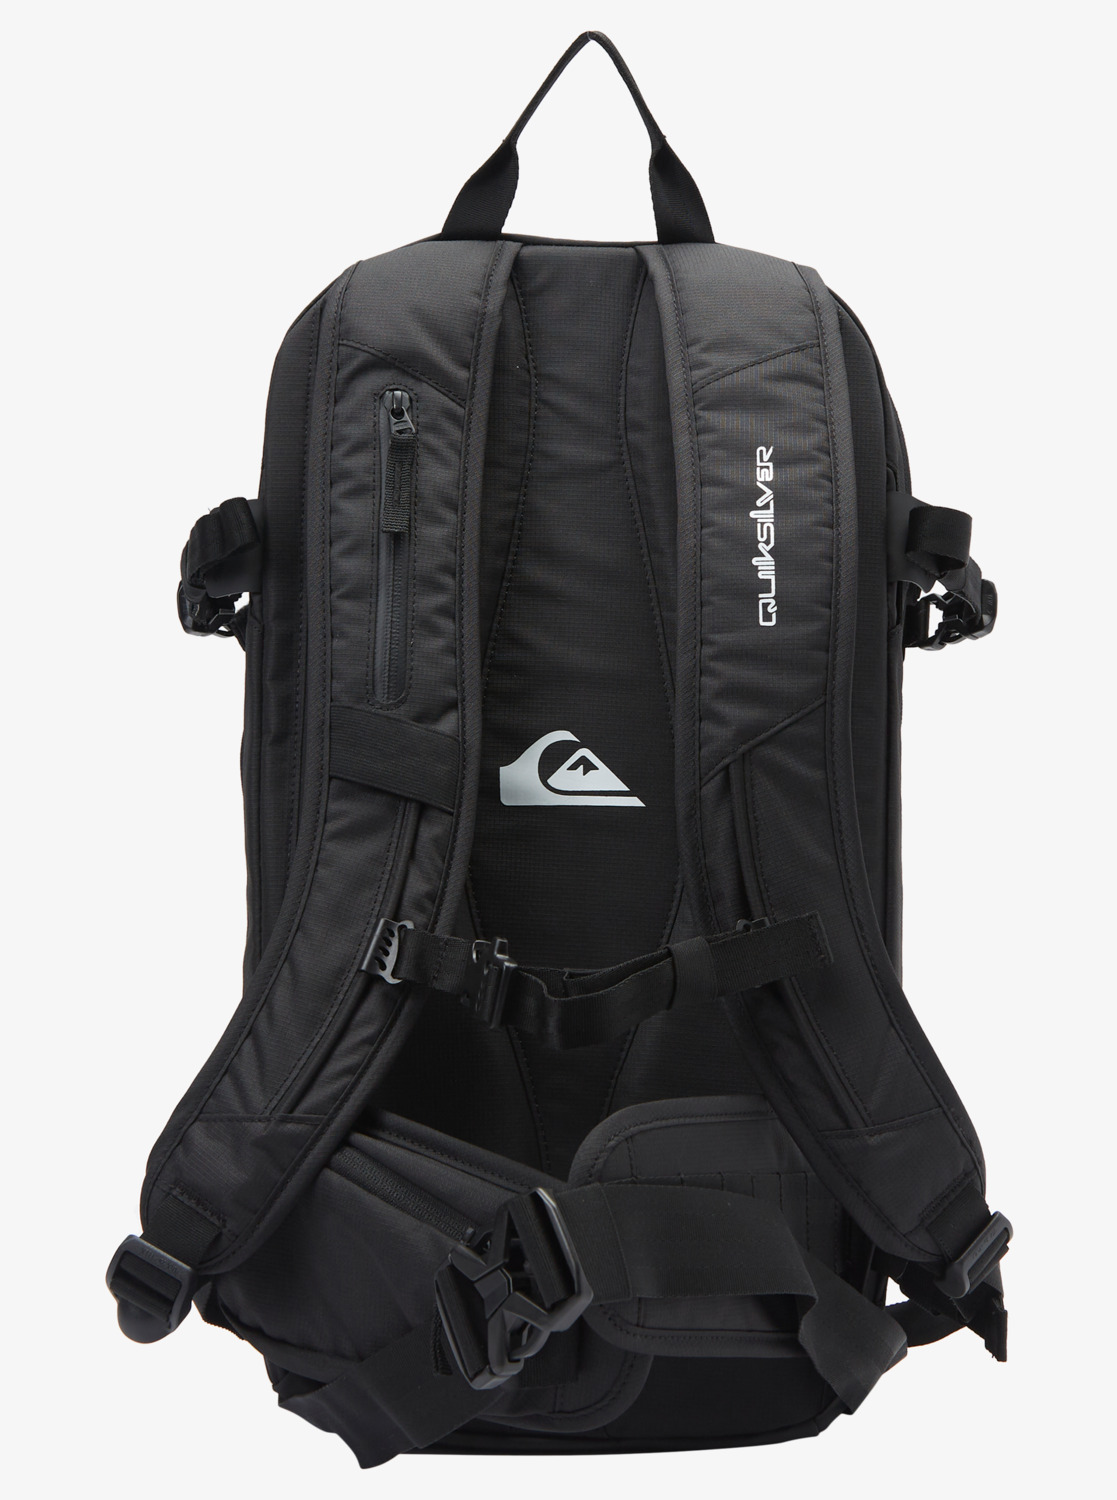 Quiksilver Oxydized 18L backpack black